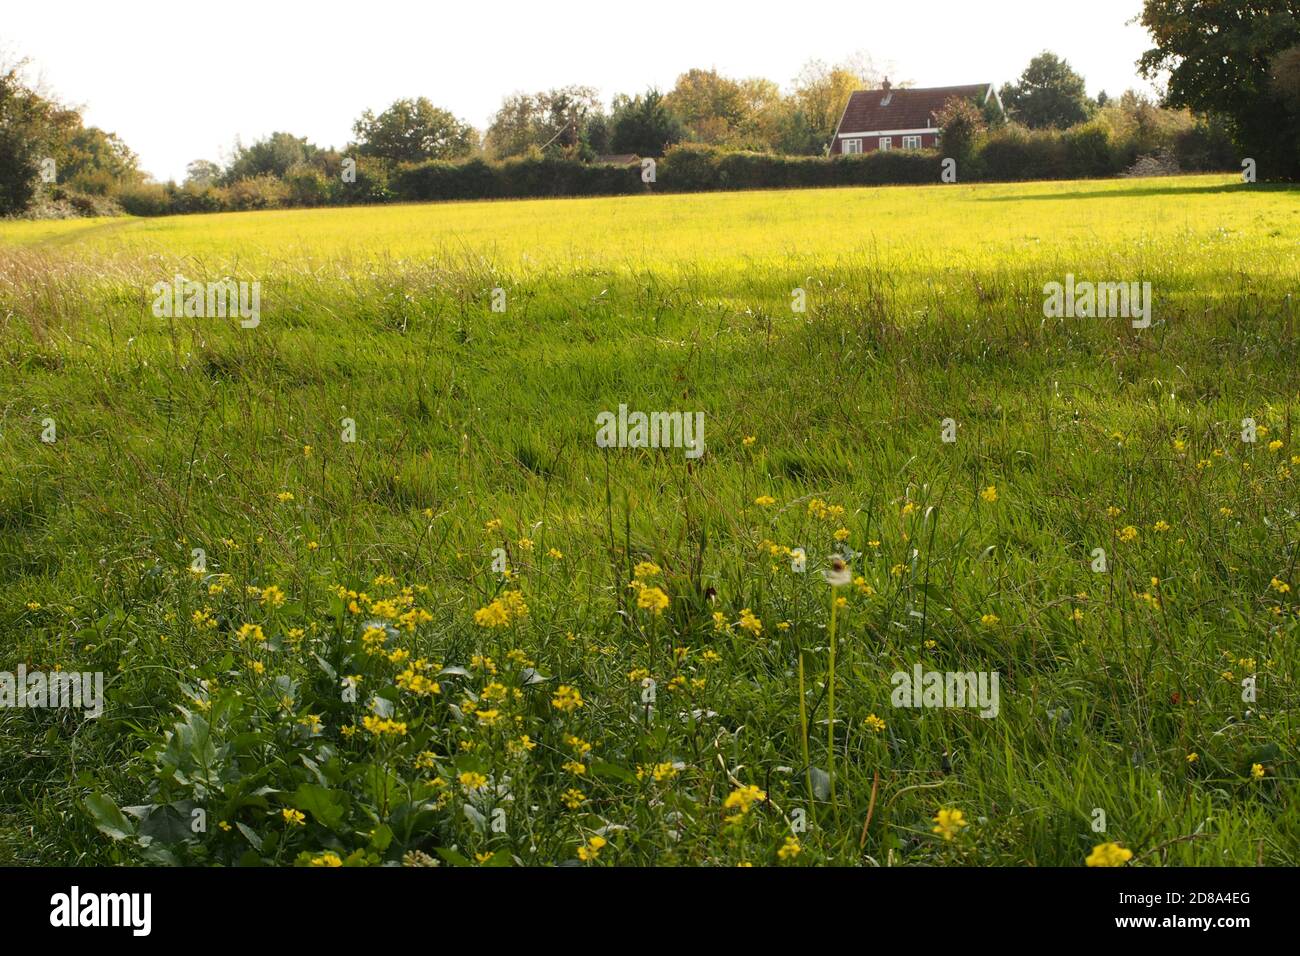 Looking up over a farmers meadow field to a house with a wild yellow meadow flower in the foreground in autumn sunshine Stock Photo